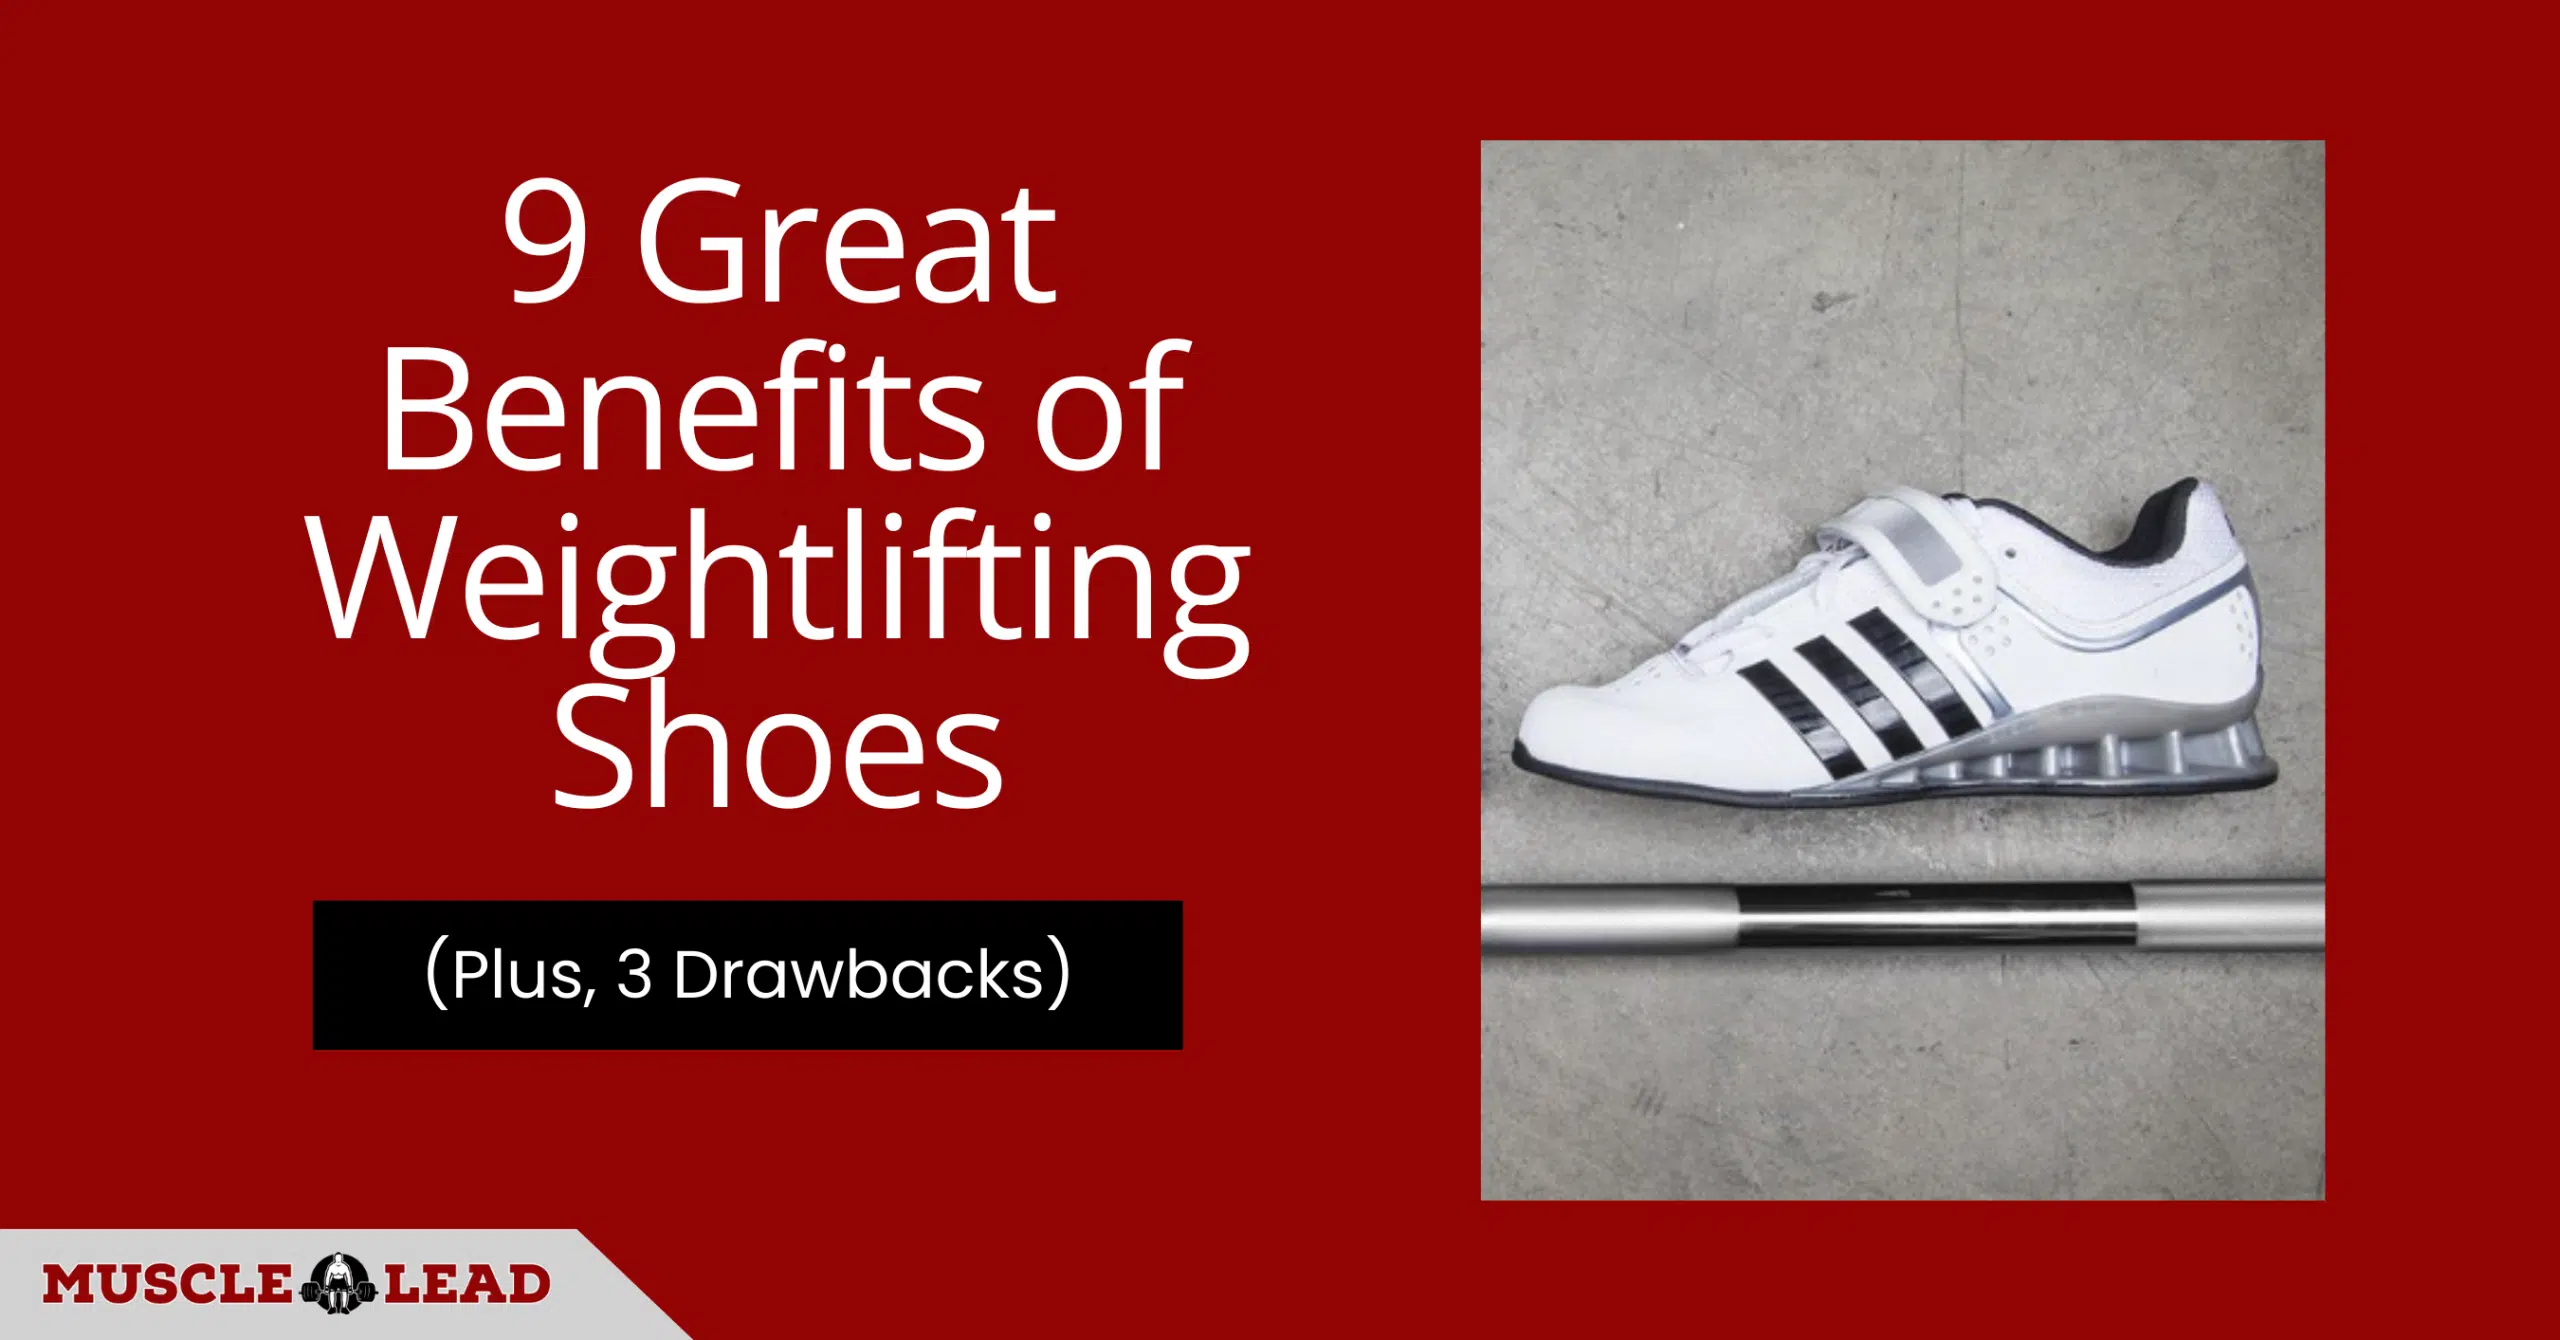 9 Great Benefits of Weightlifting Shoes (Plus, 3 Drawbacks)